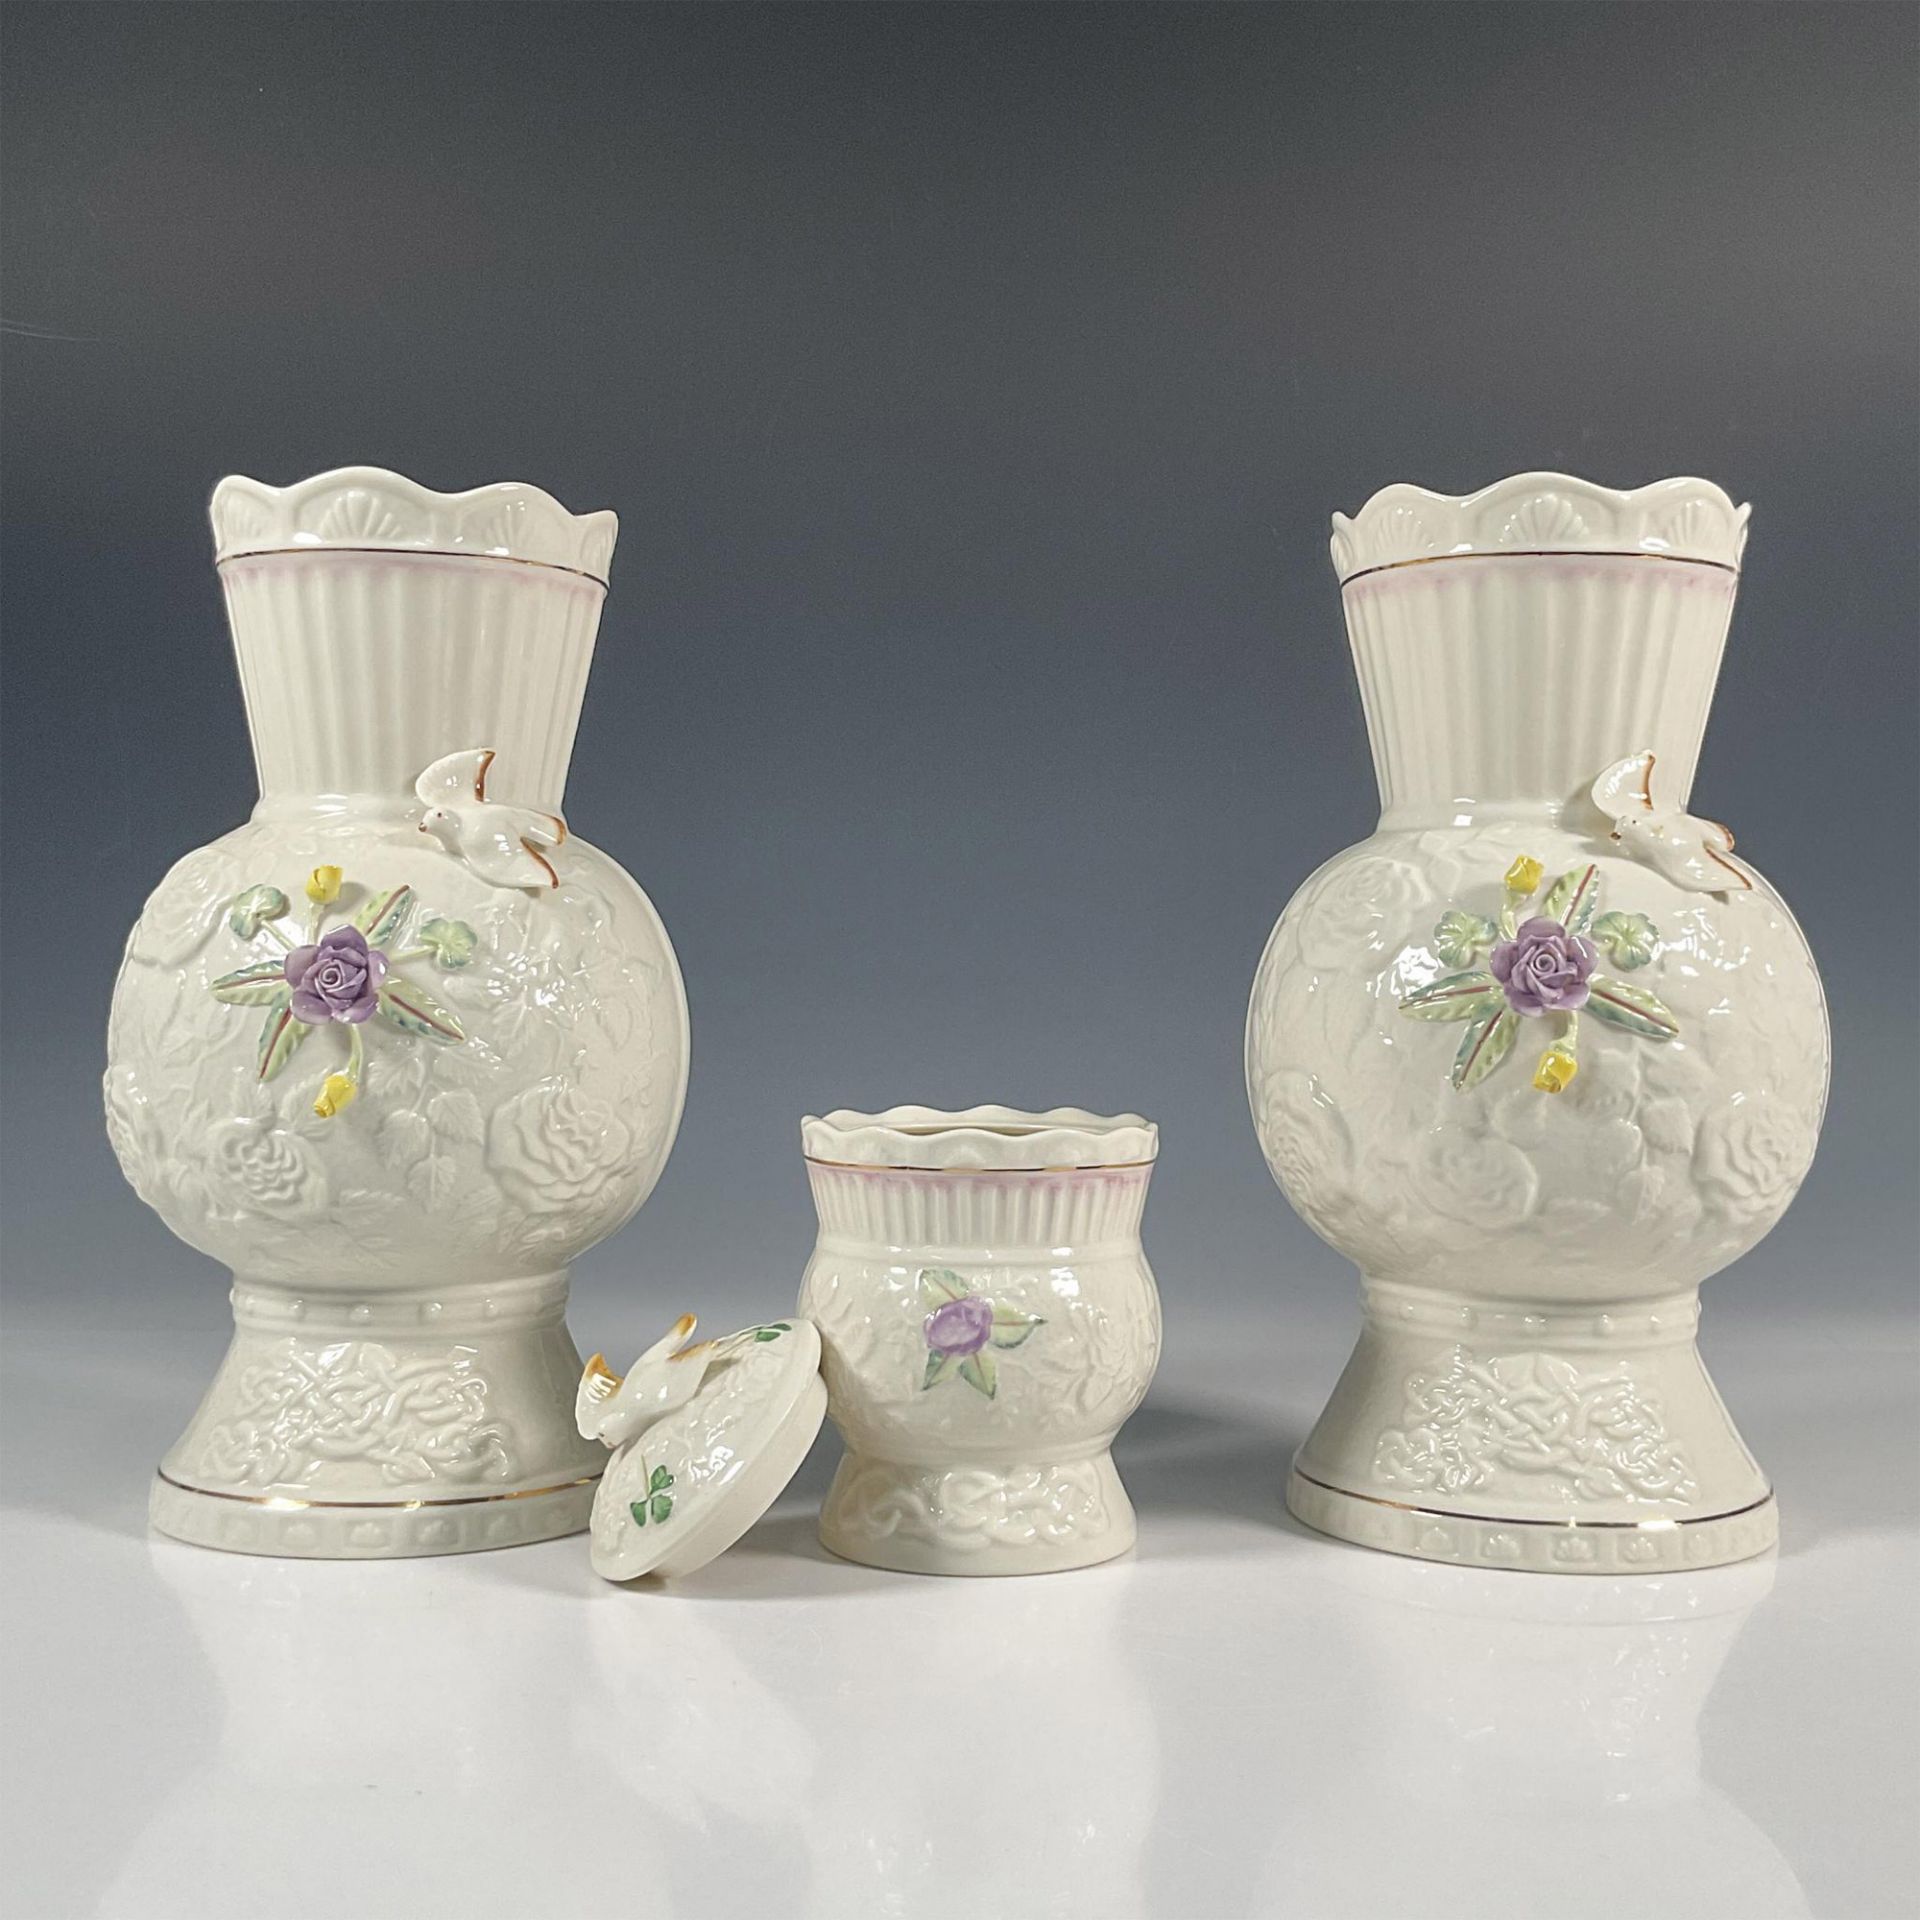 3pc Belleek Pottery Vases and Lidded Box, Song Bird - Image 4 of 5